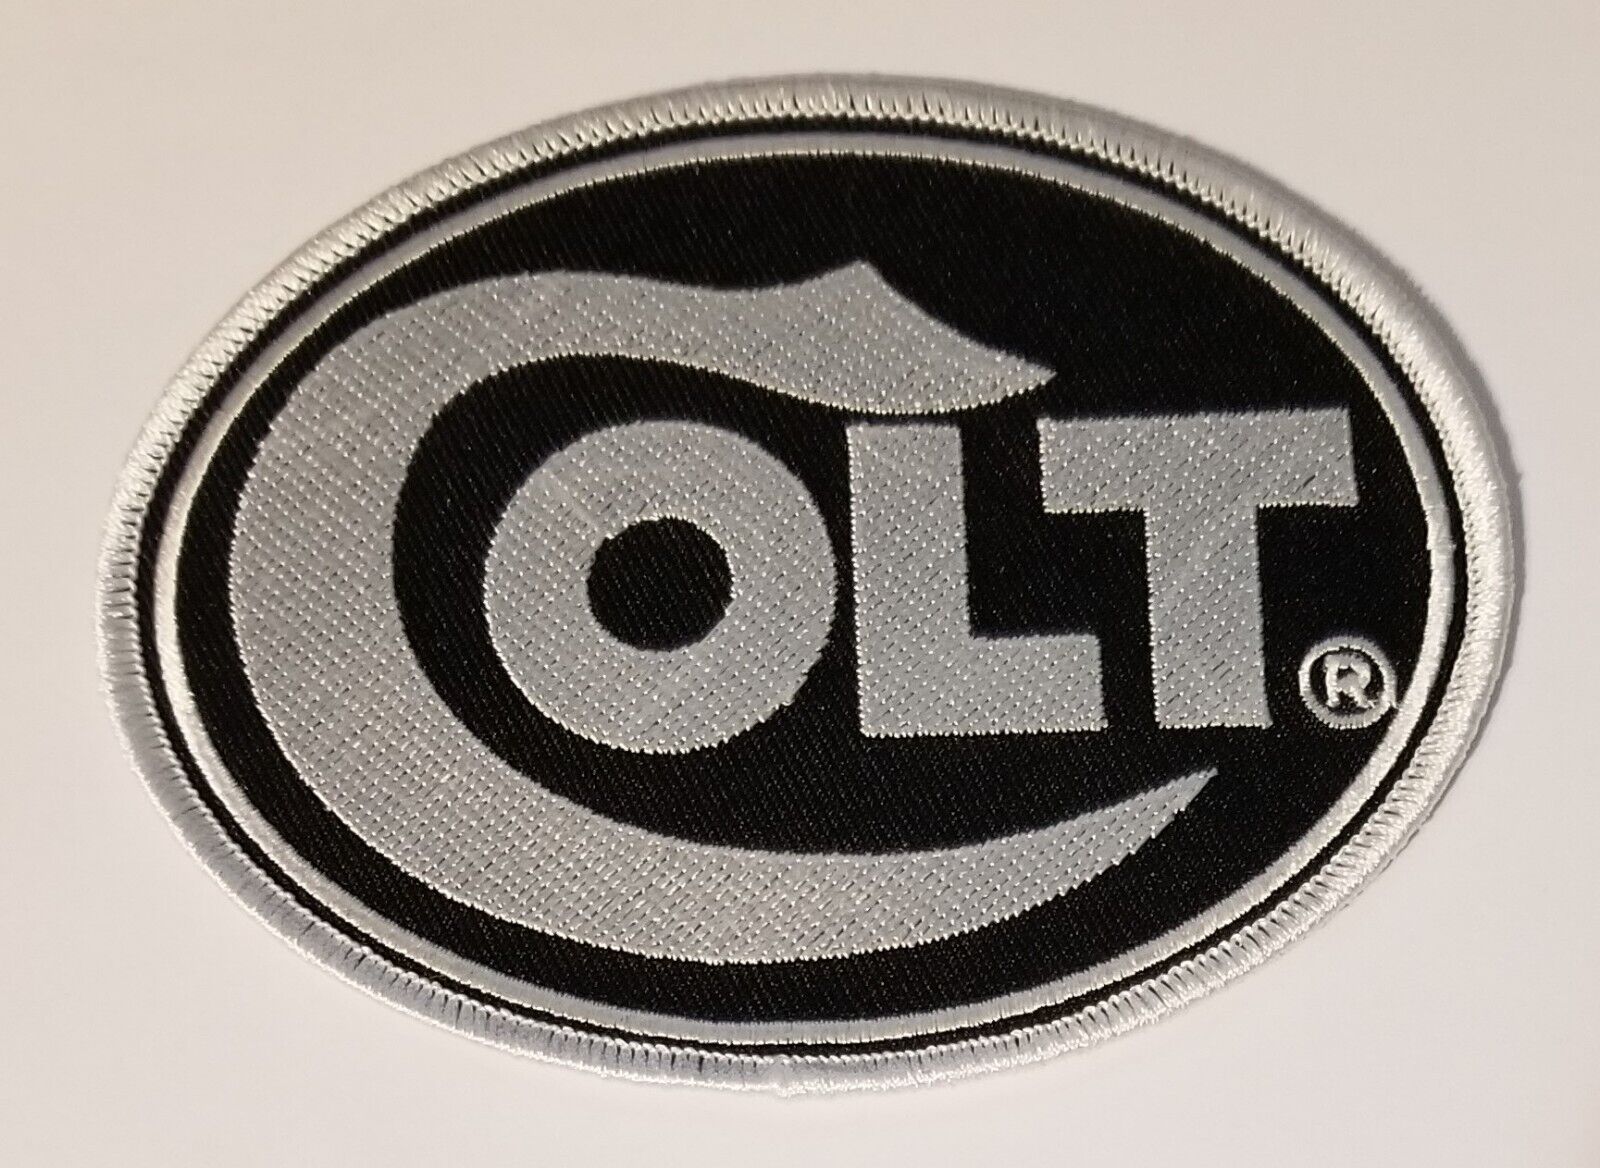 COLT Patch  IRON / SEW-ON style Patch 4.5  wide by 3.5 tall approx